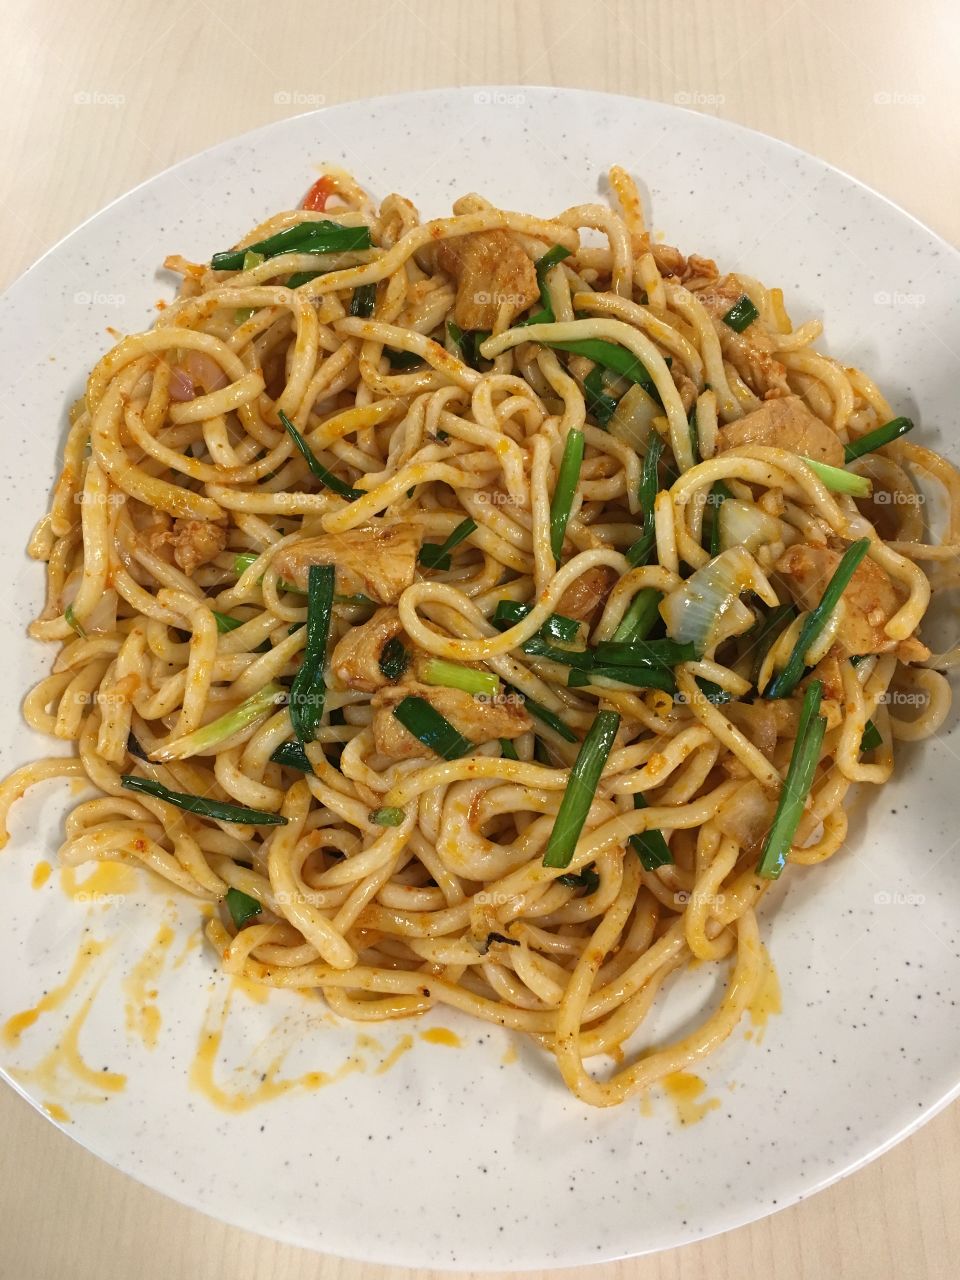 Spicy hand-pulled noodles with diced chicken